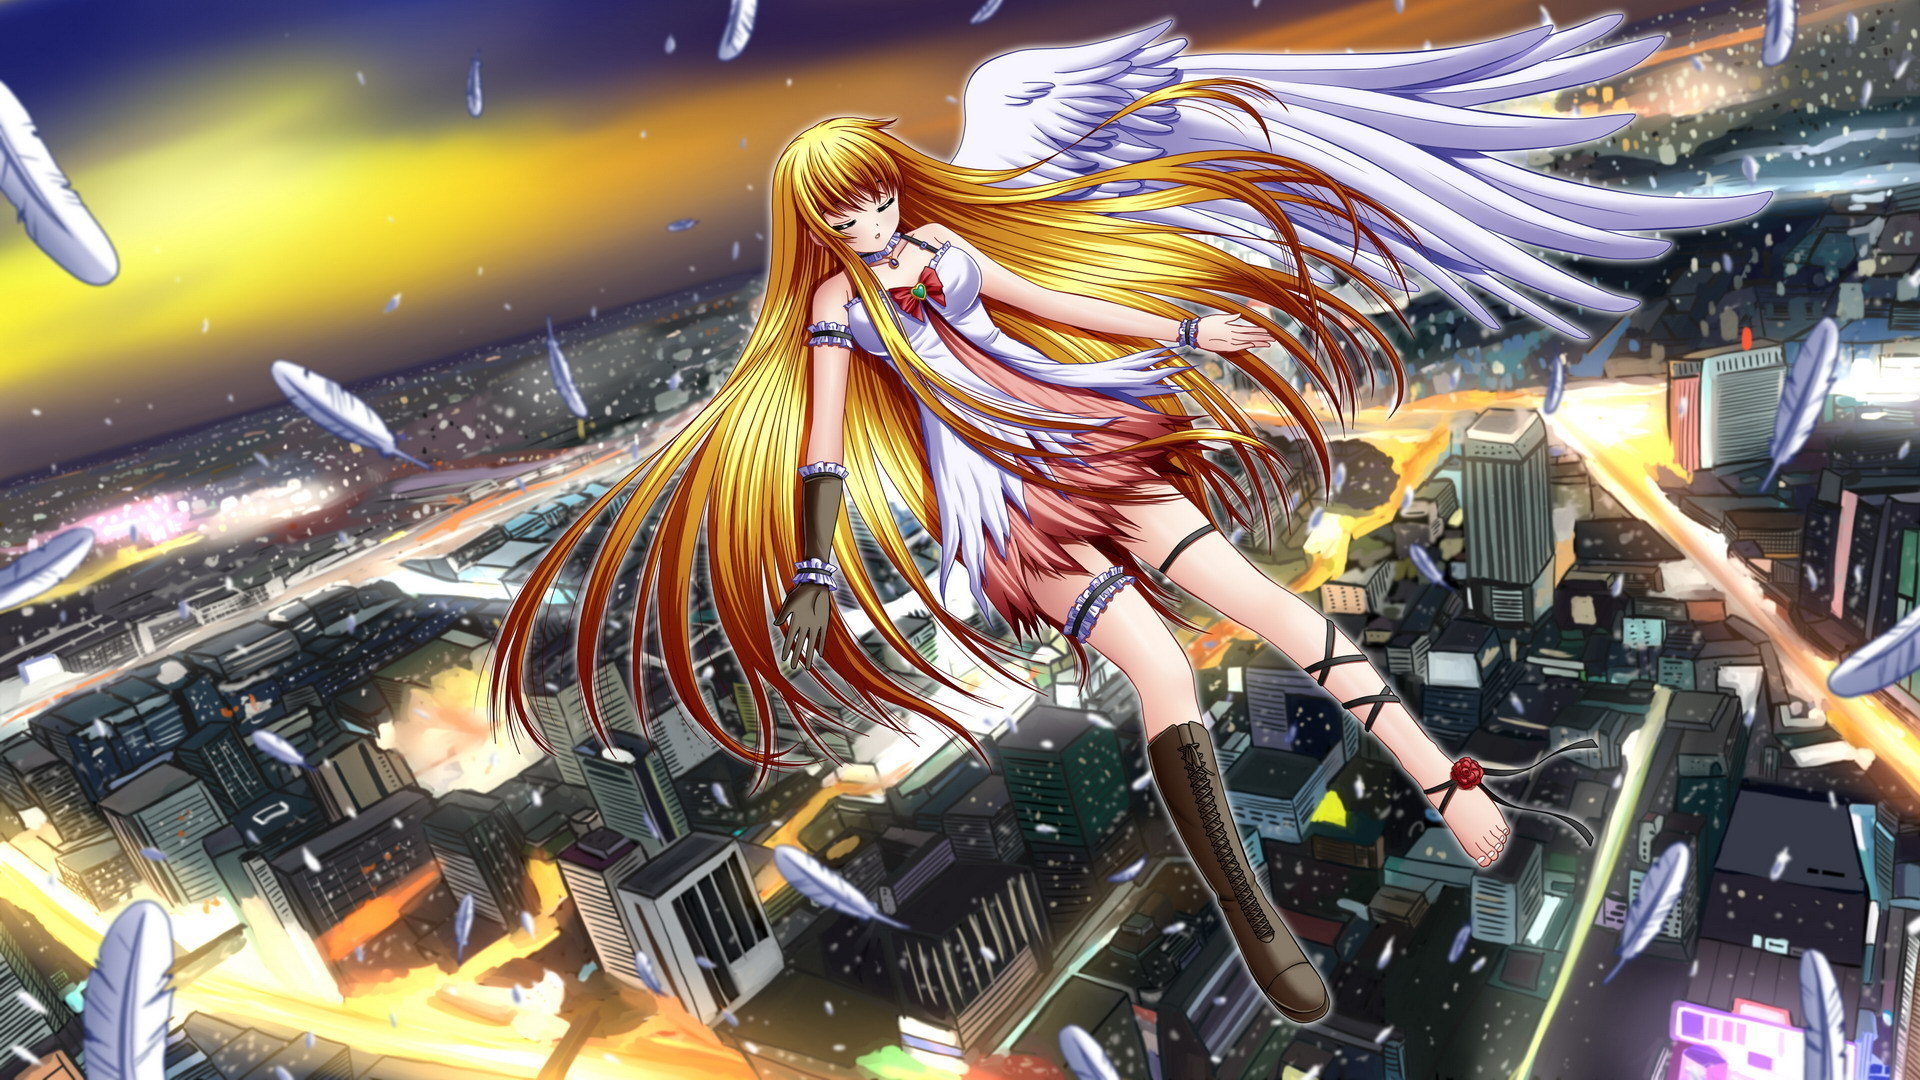 Best Angel Anime wallpaper ID:61934 for High Resolution full hd 1080p computer